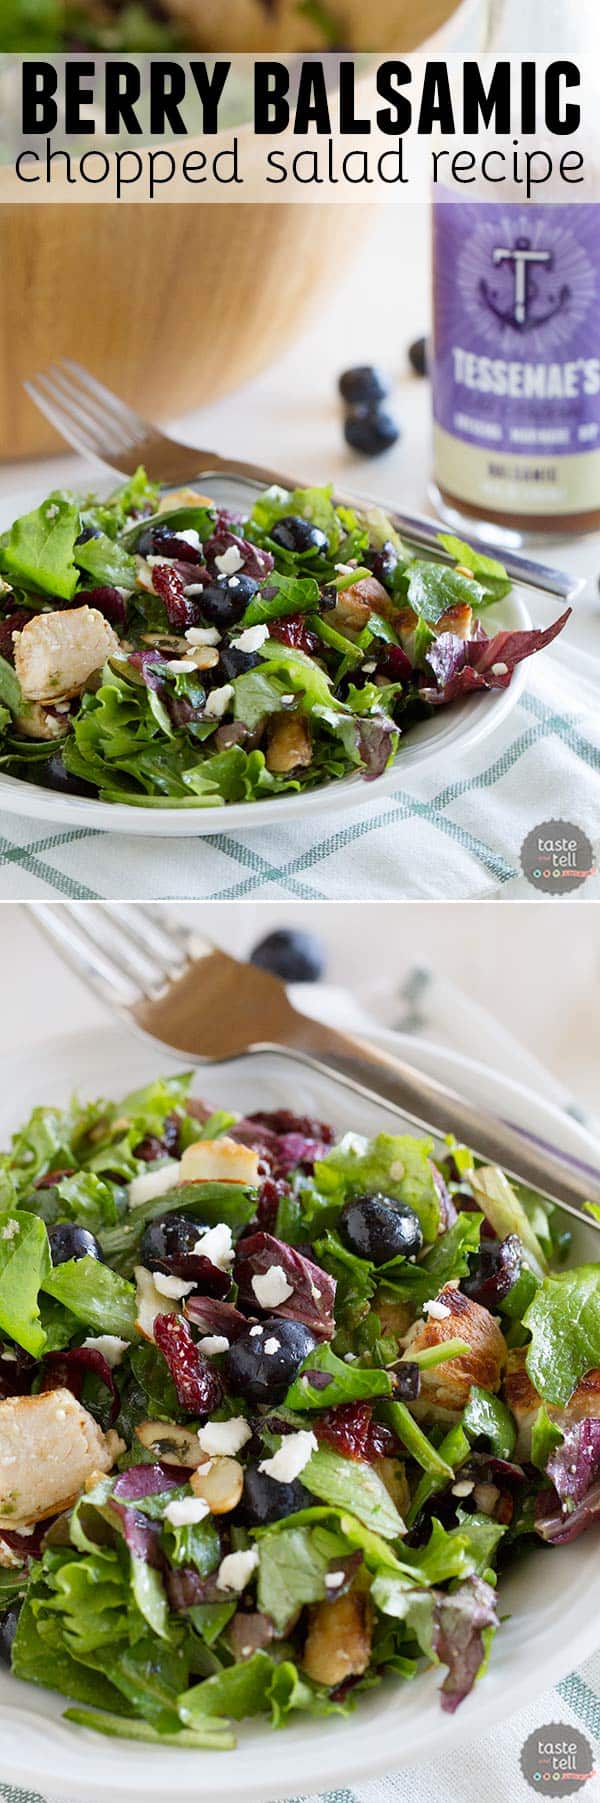 Sweet, tart and salty, this Berry Balsamic Chopped Salad Recipe with Grilled Chicken is perfect for a light dinner or lunch, or great as a side dish.